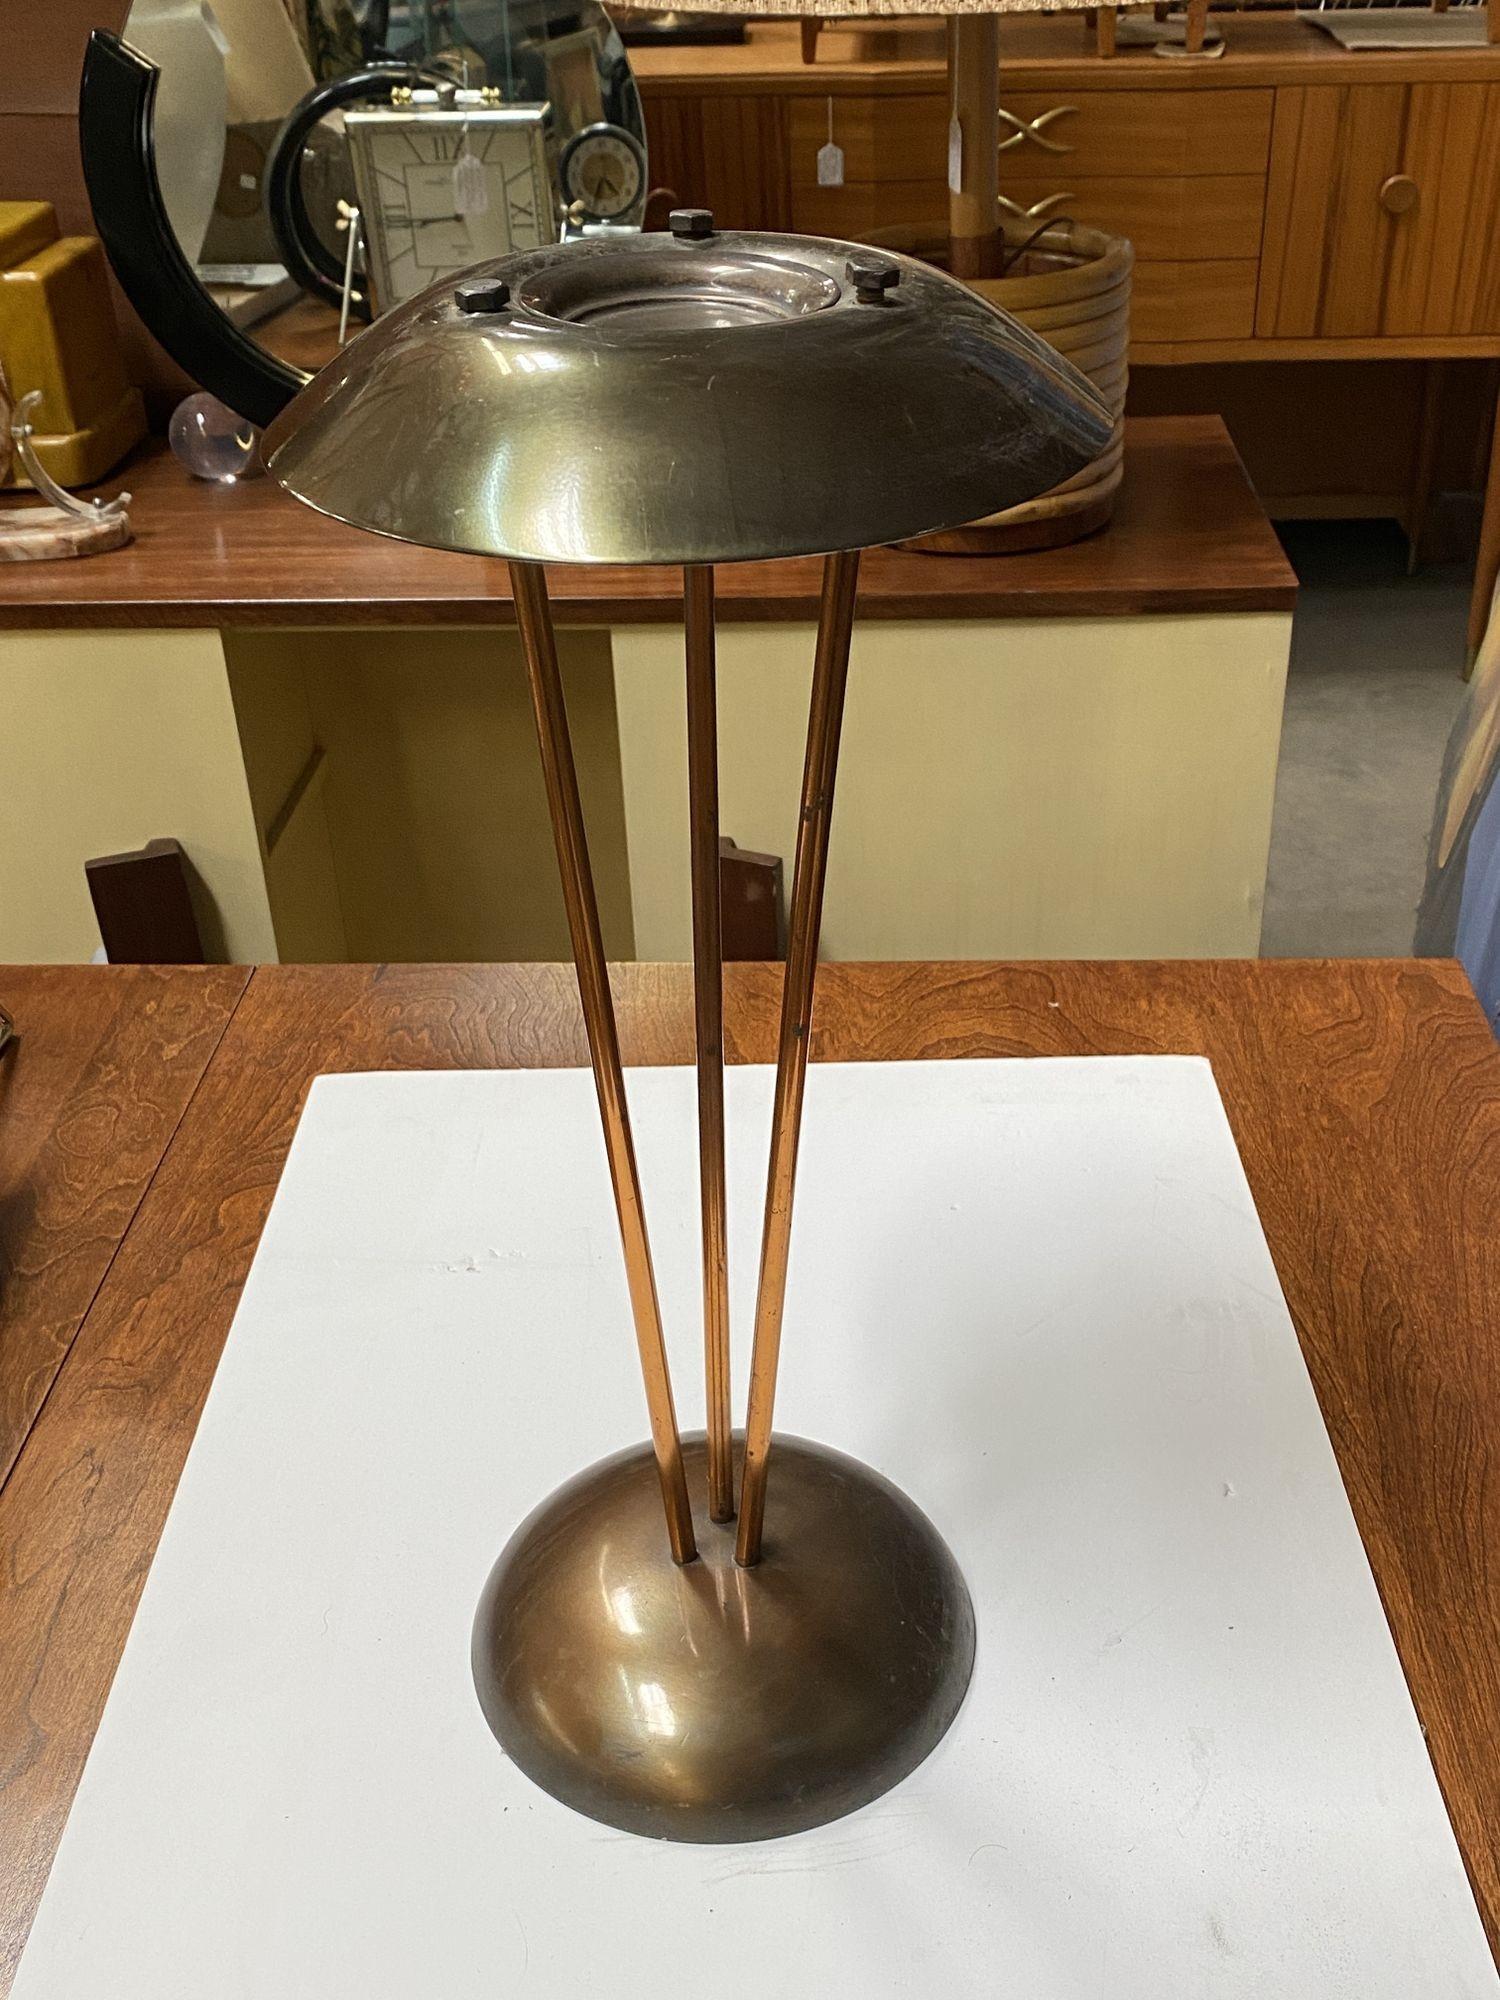 Circa 1930 Machine Age floor standing ashtray featuring a bronze have cut spere base with 3 copper Spidel arms connect to a spherical top. The ashtray is reminiscent of designers of the period like Walter Von Nessen with simple shapes made from